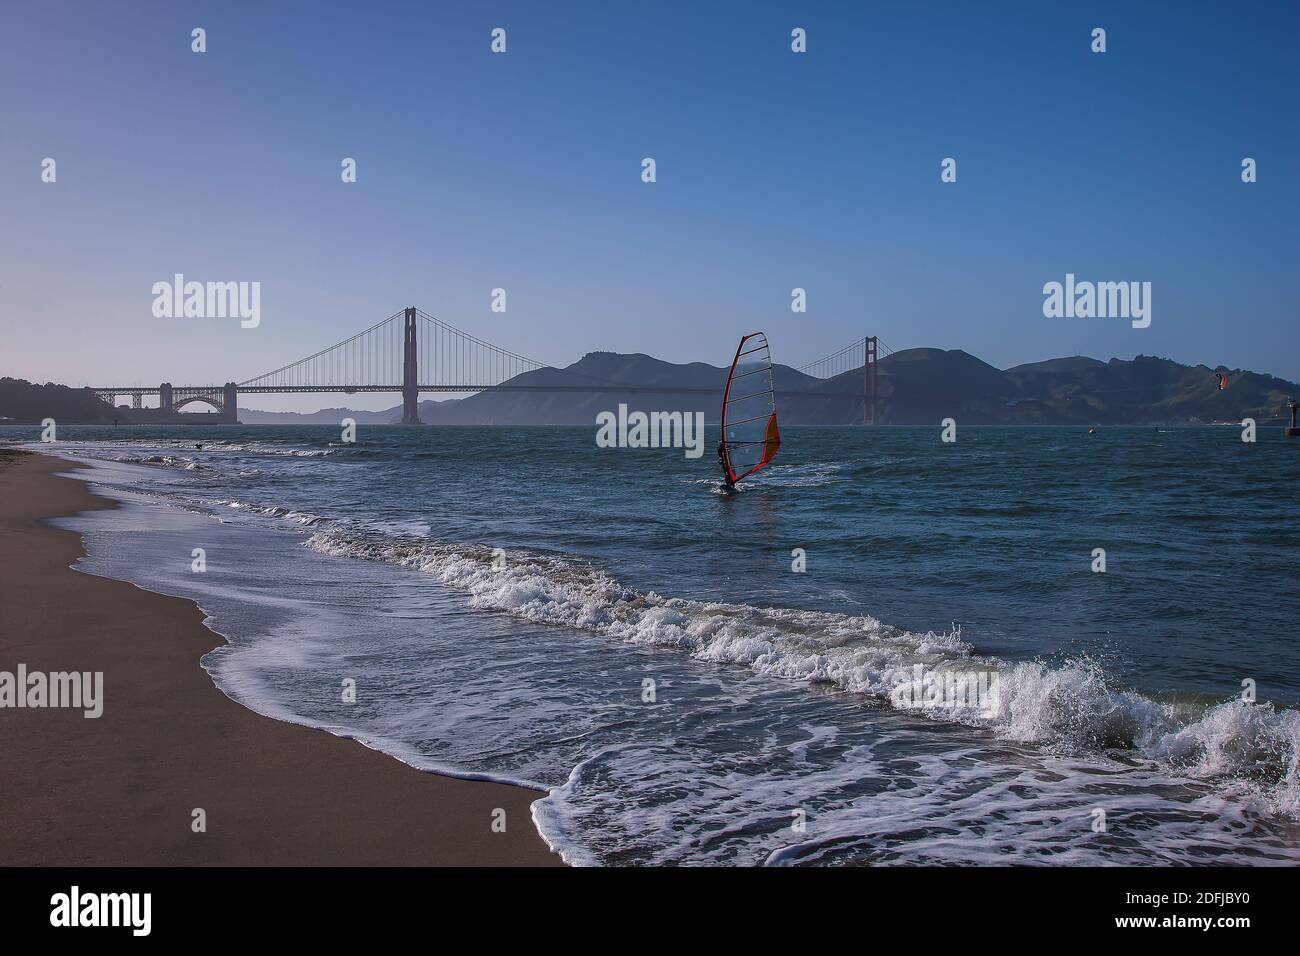 Windsurfer closing in on the beach in front of Golden Gate Bridge, a Kite-surfer in the distance, San Francisco, California, United States of America Stock Photo